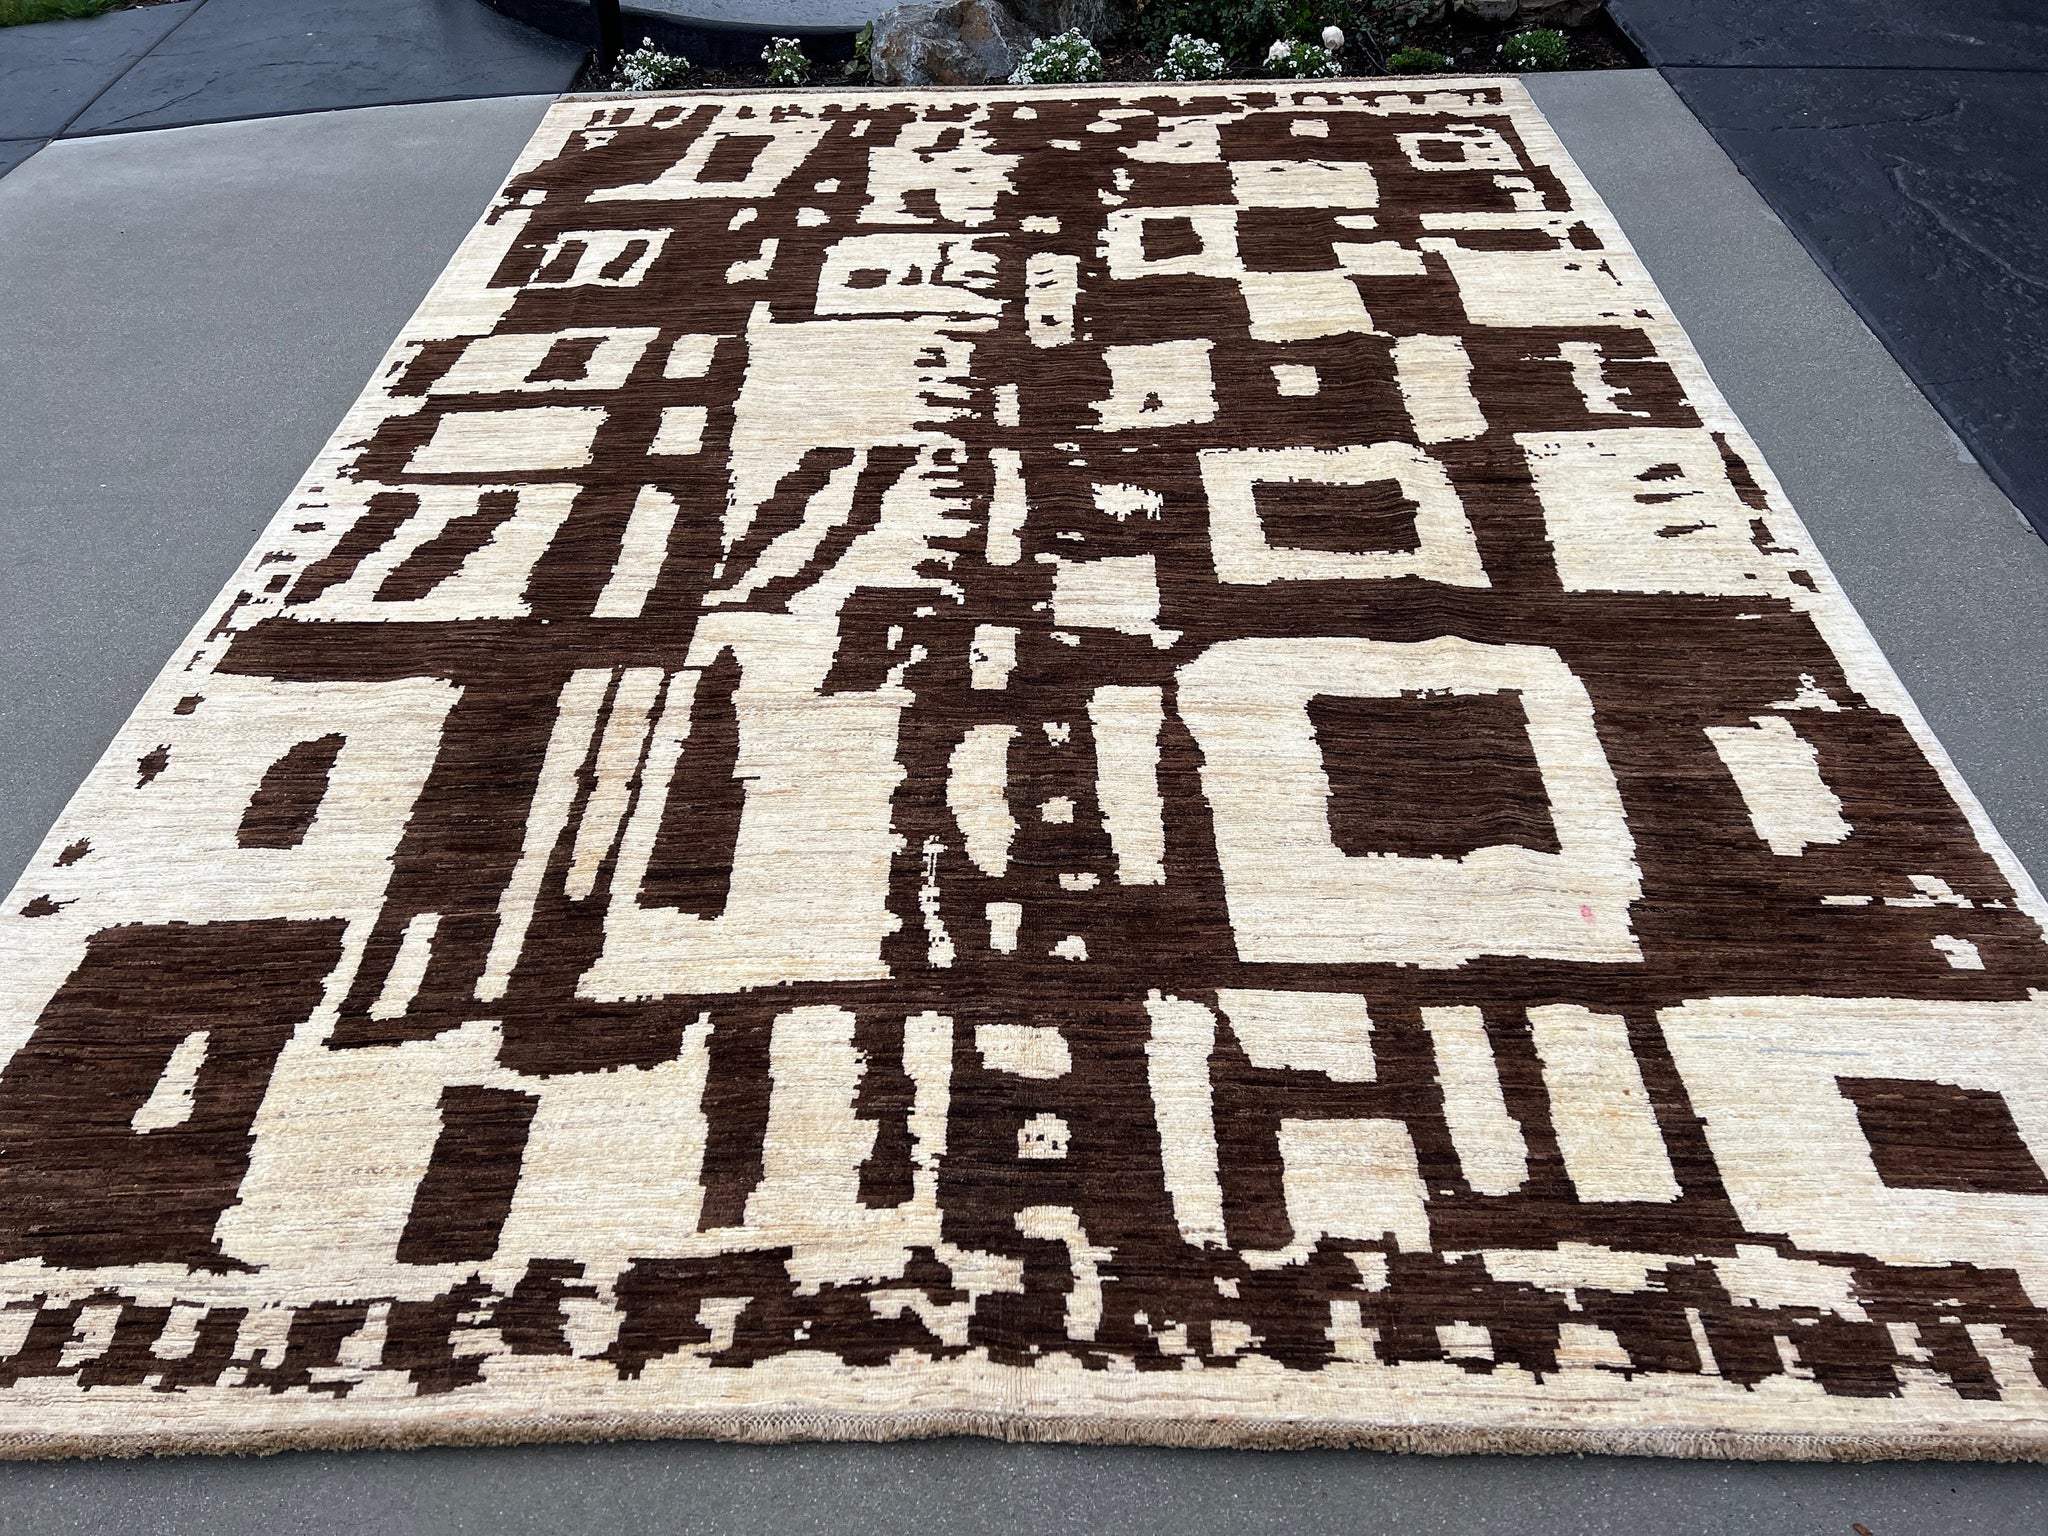 7x10 (215x305) Handmade Afghan Rug | Neutral Cream Beige Chocolate Brown | Hand Knotted Persian Moroccan Oriental Plush Oushak Ourain Wool